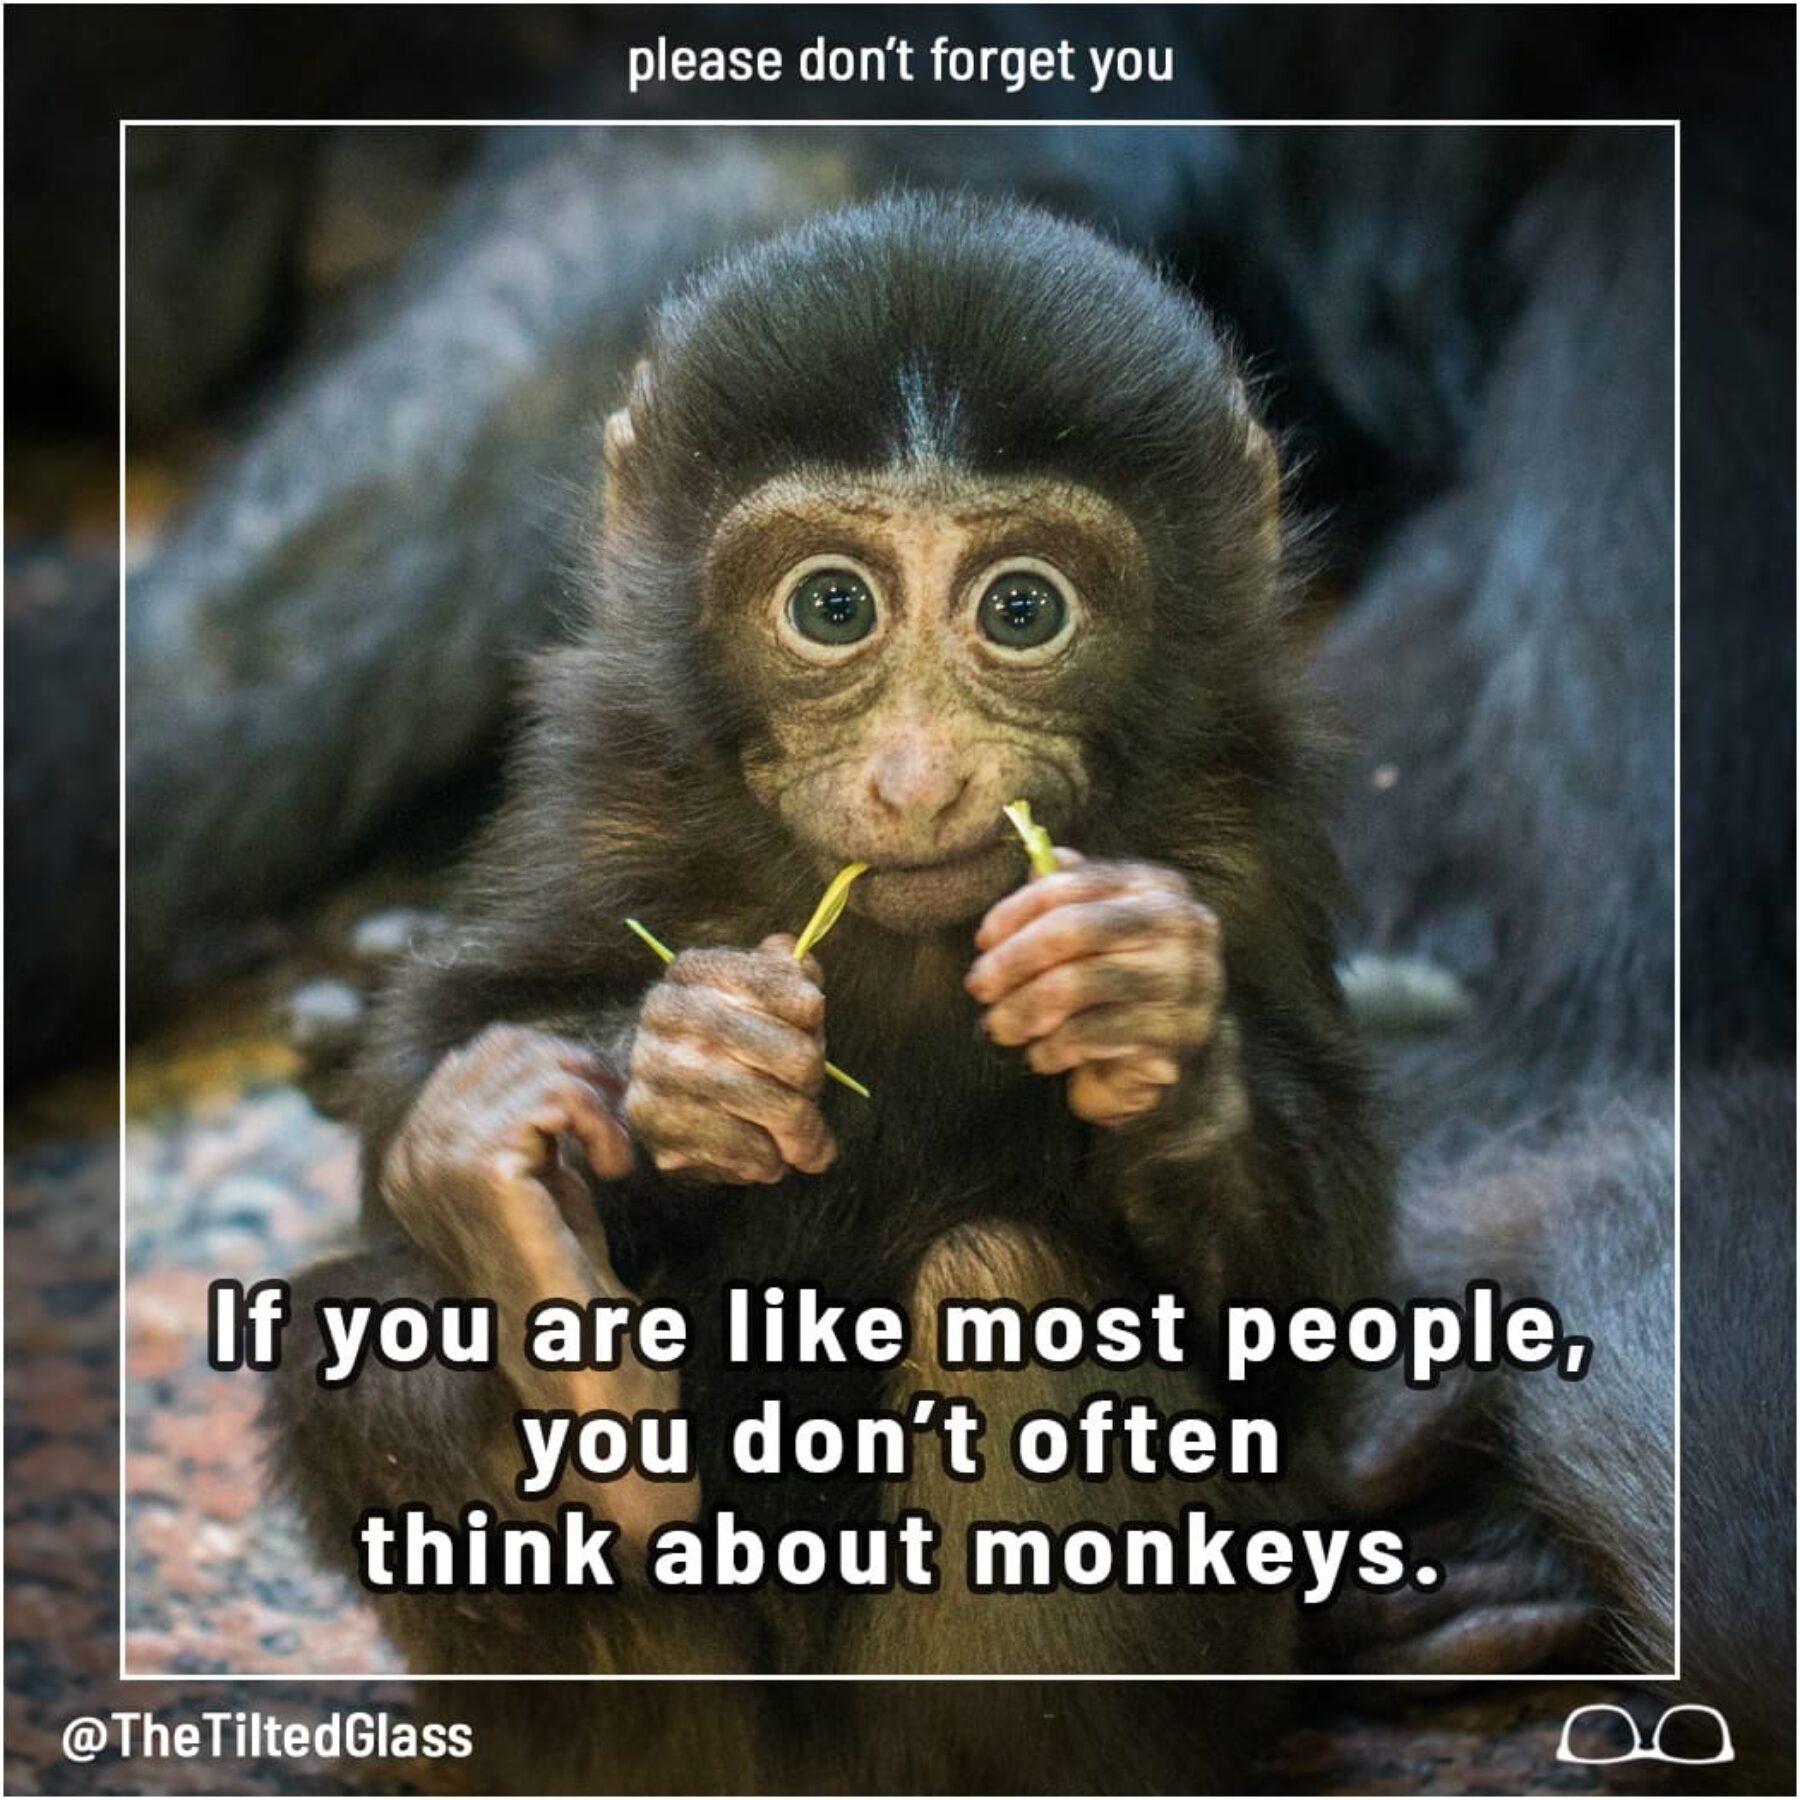 If you are like most people, you don’t often think about monkeys